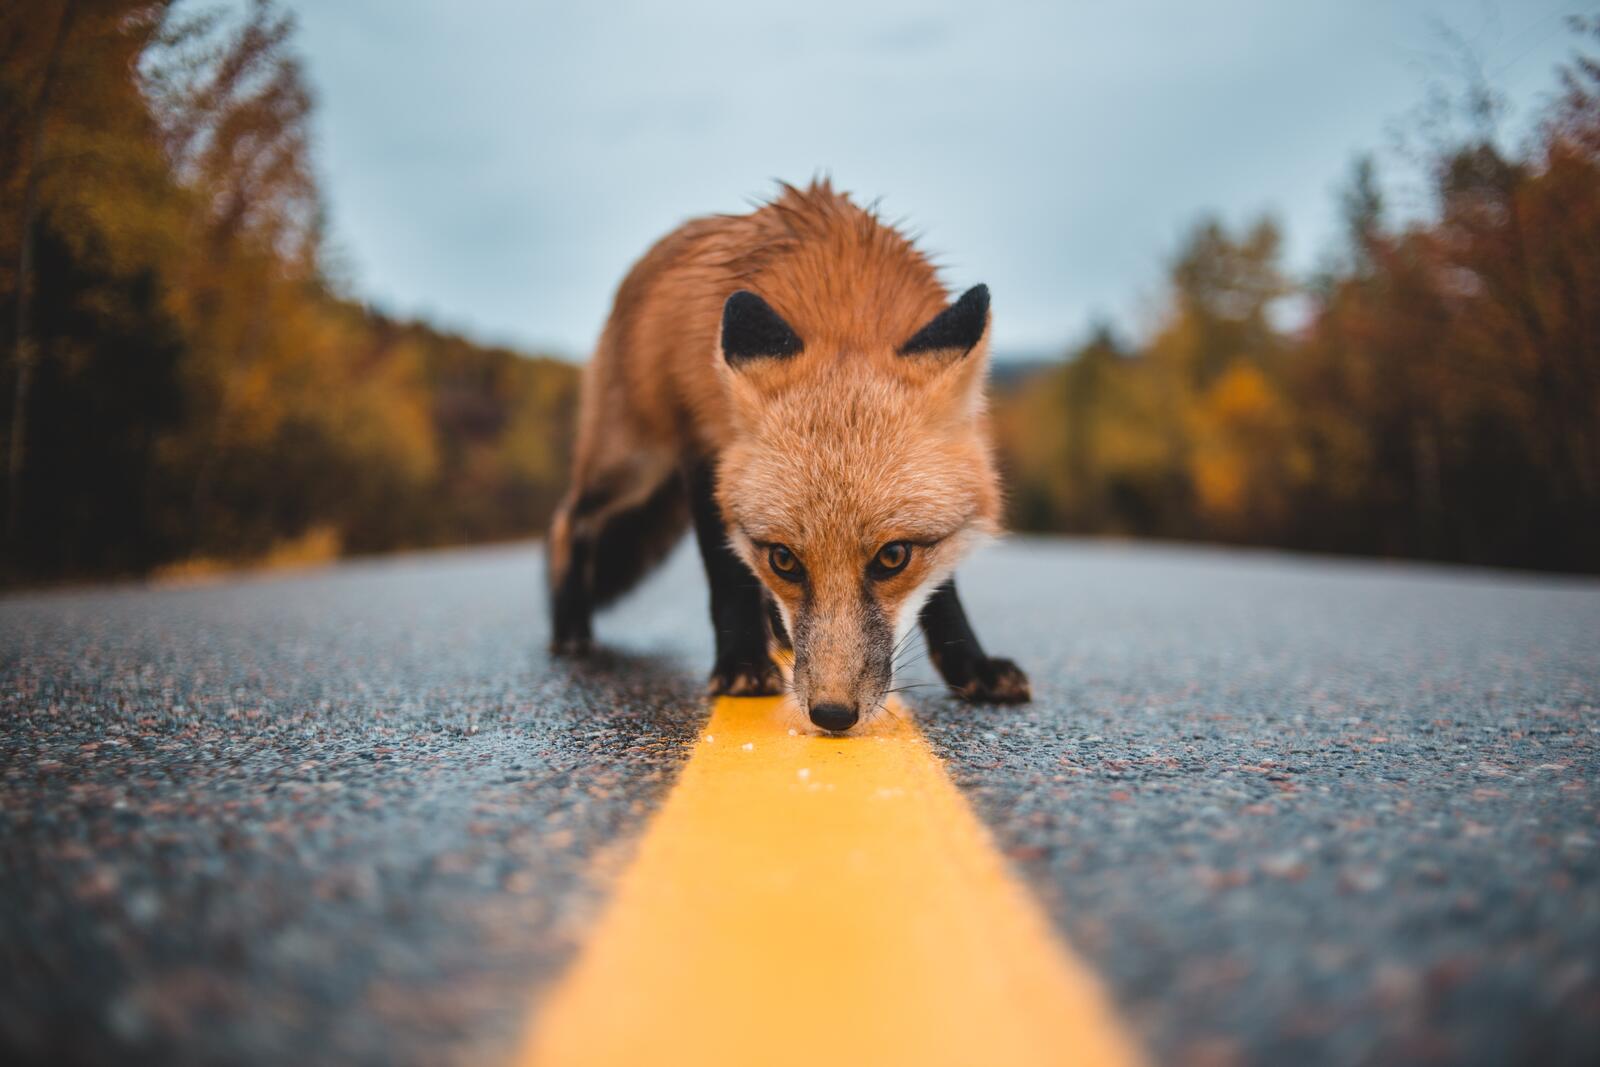 Free photo The Fox sniffs the road markings